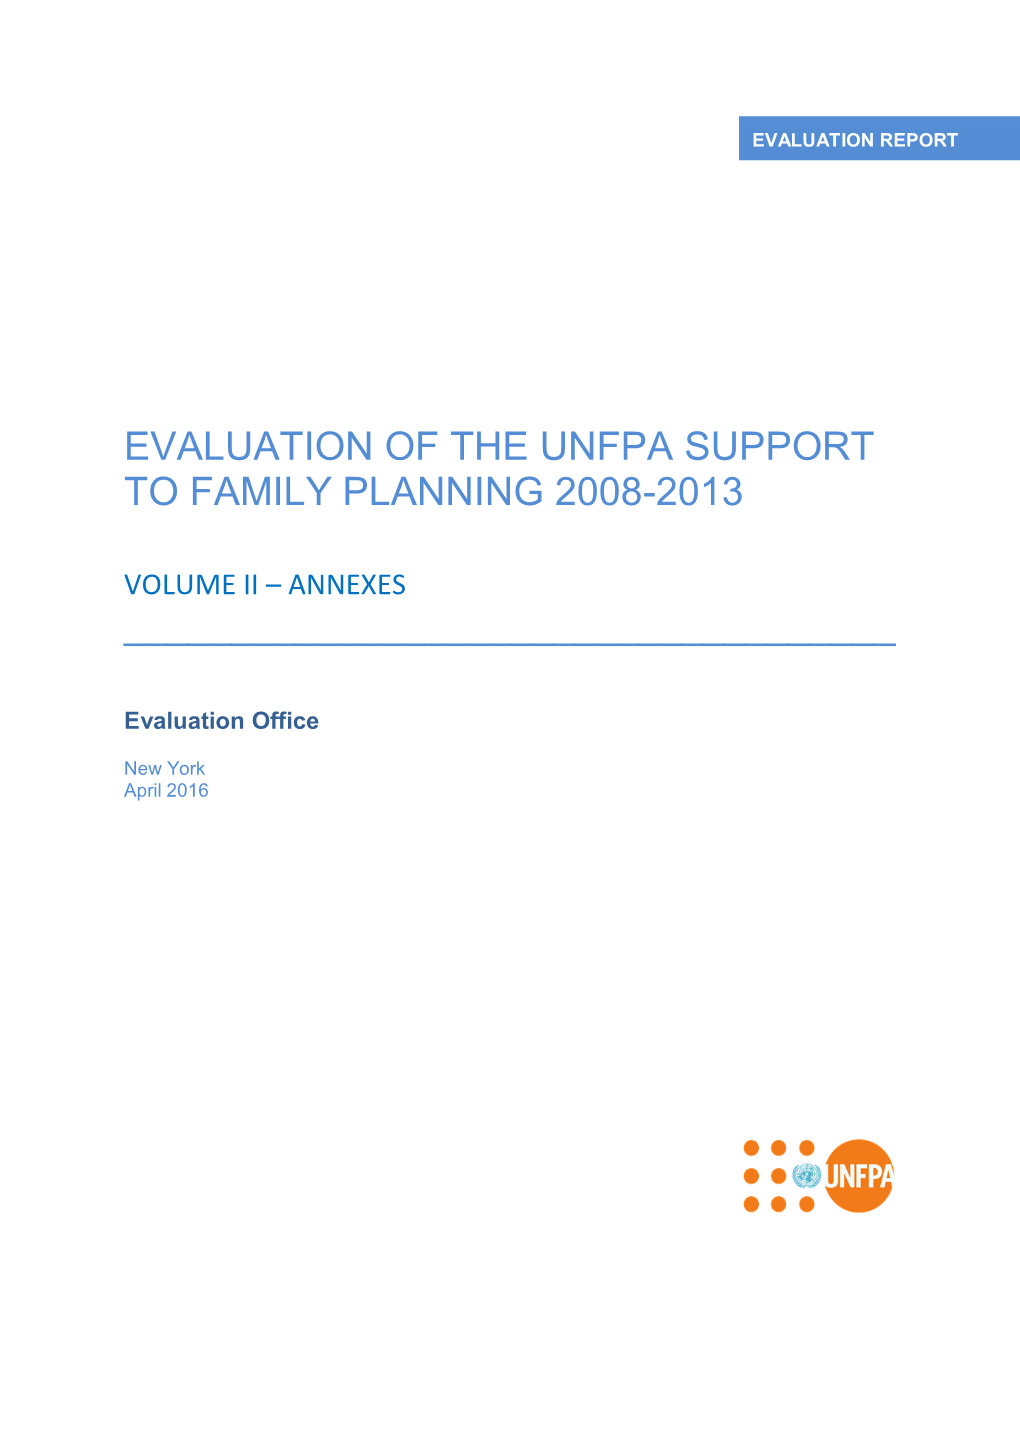 Evaluation of the Unfpa Support to Family Planning 2008-2013